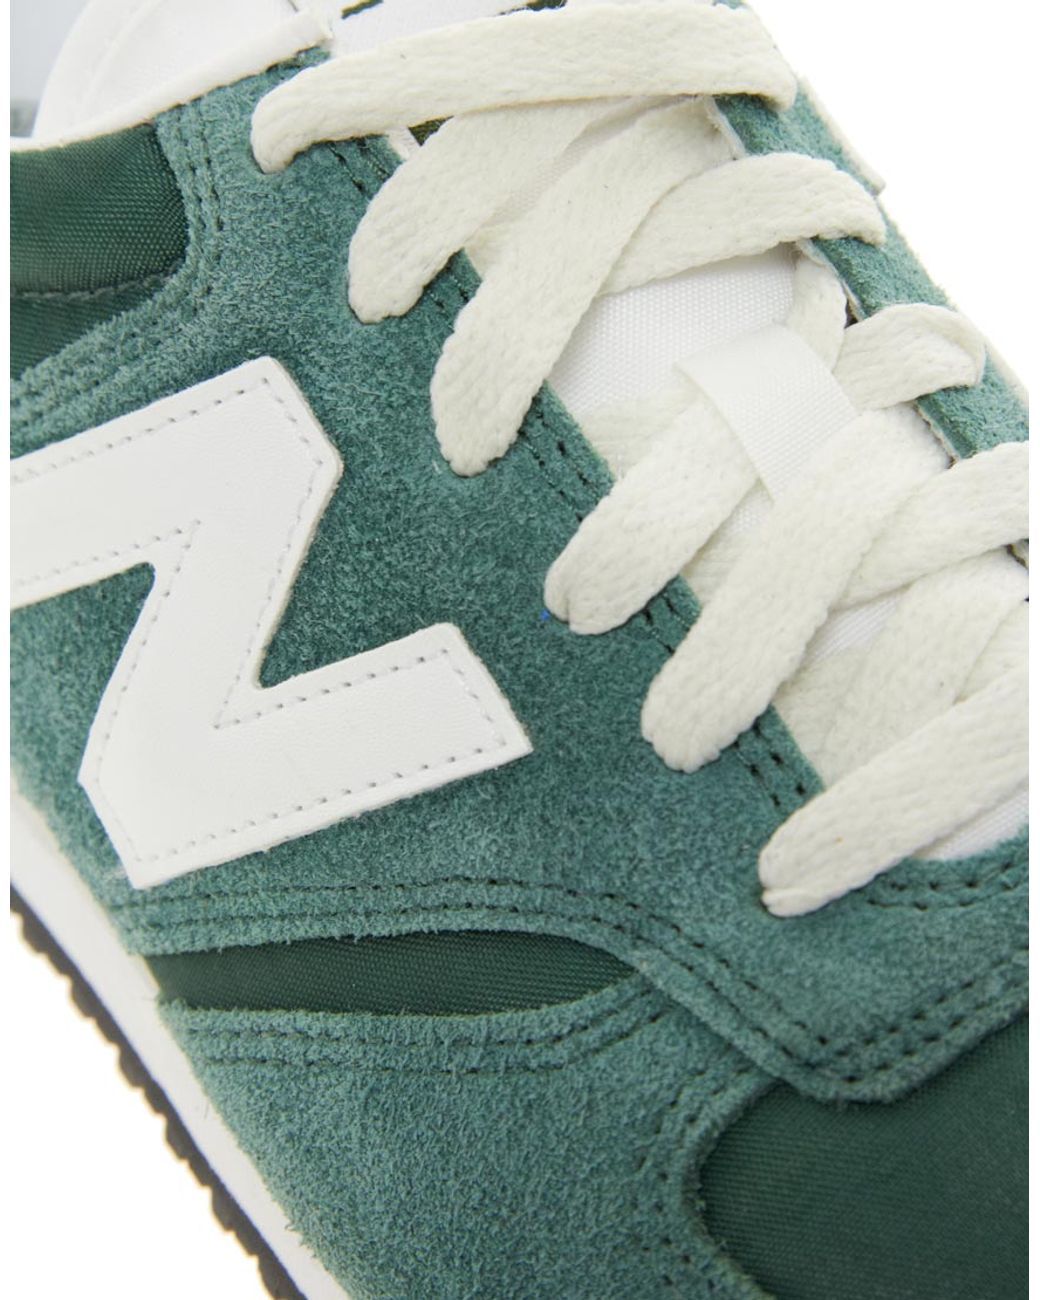 New Balance 420 Green Vintage Trainers | Lyst